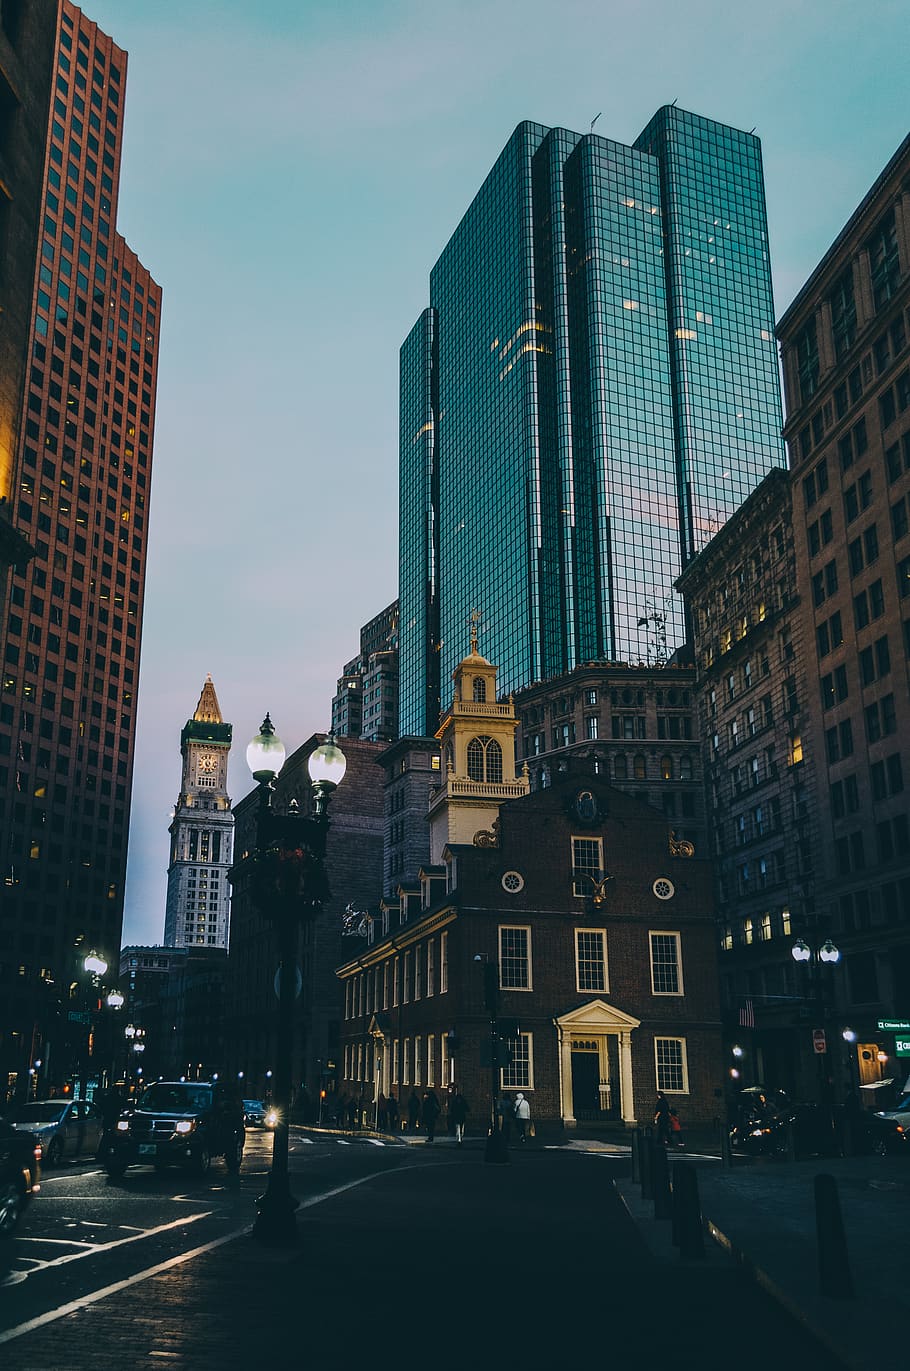 boston, united states, contrast, old, architecture, buildings